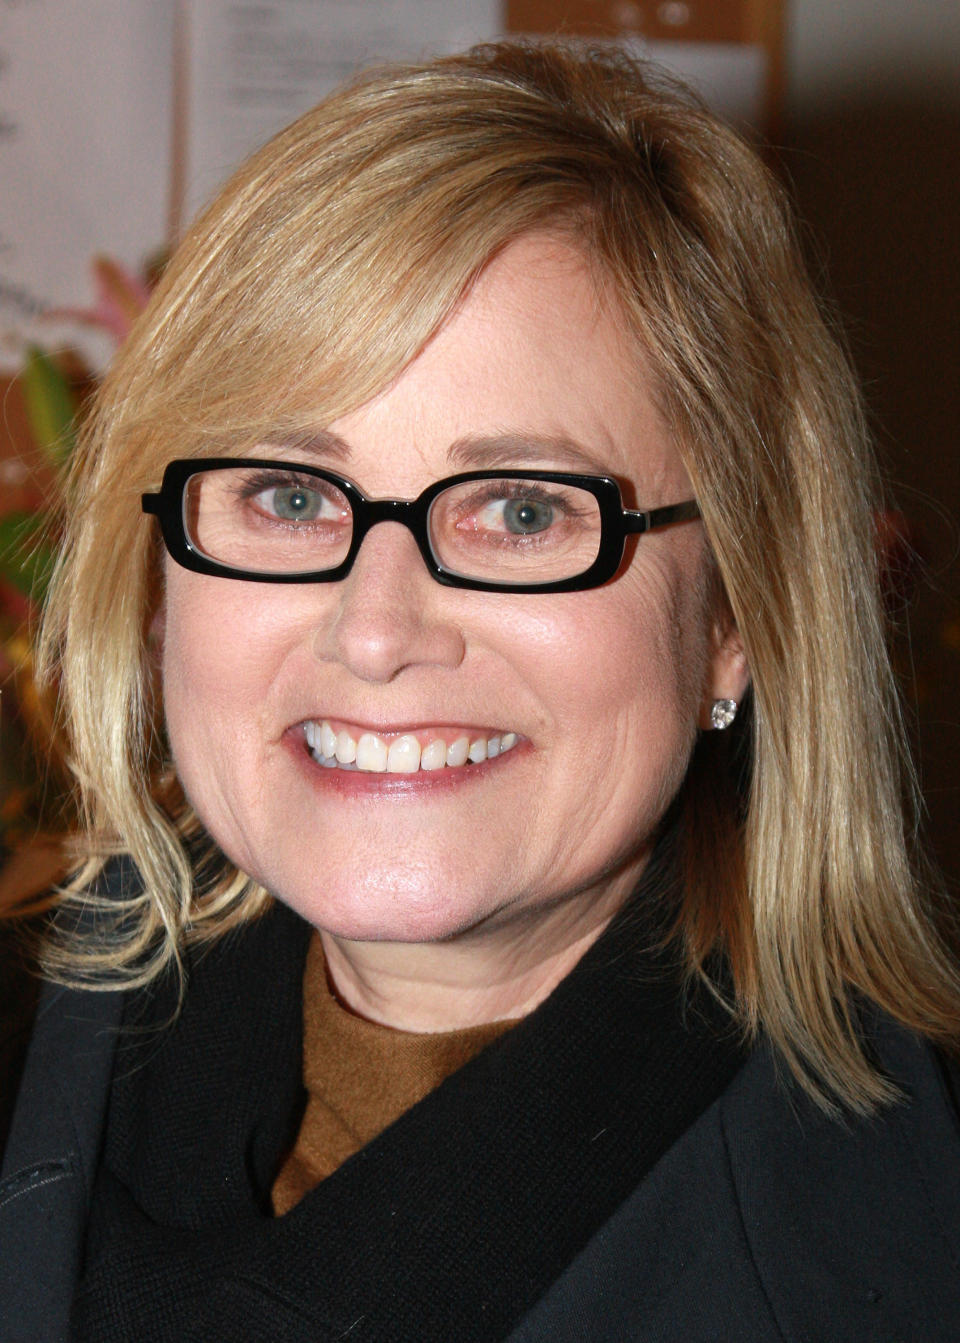 Maureen McCormick, was born in Woodland Hills, California, on August 5, 1956.  After "The Brady Bunch" ended the actress starred in several other films and made guest appearances on the TV shows including "The Streets of San Francisco," "Love Boat," "Fantasy Island," and "Happy Days."   During her career the actress developed a severe drug addiction. She married actor Michael Cummings in 1985 and it was then that she started her road to rehabilitation.   Their daughter, Natalie Michelle, was born on May 19, 1989.   McCormick returned to TV in 2007 for VH1's Celebrity Fit Club, losing weight and ultimately winning the onscreen contest.